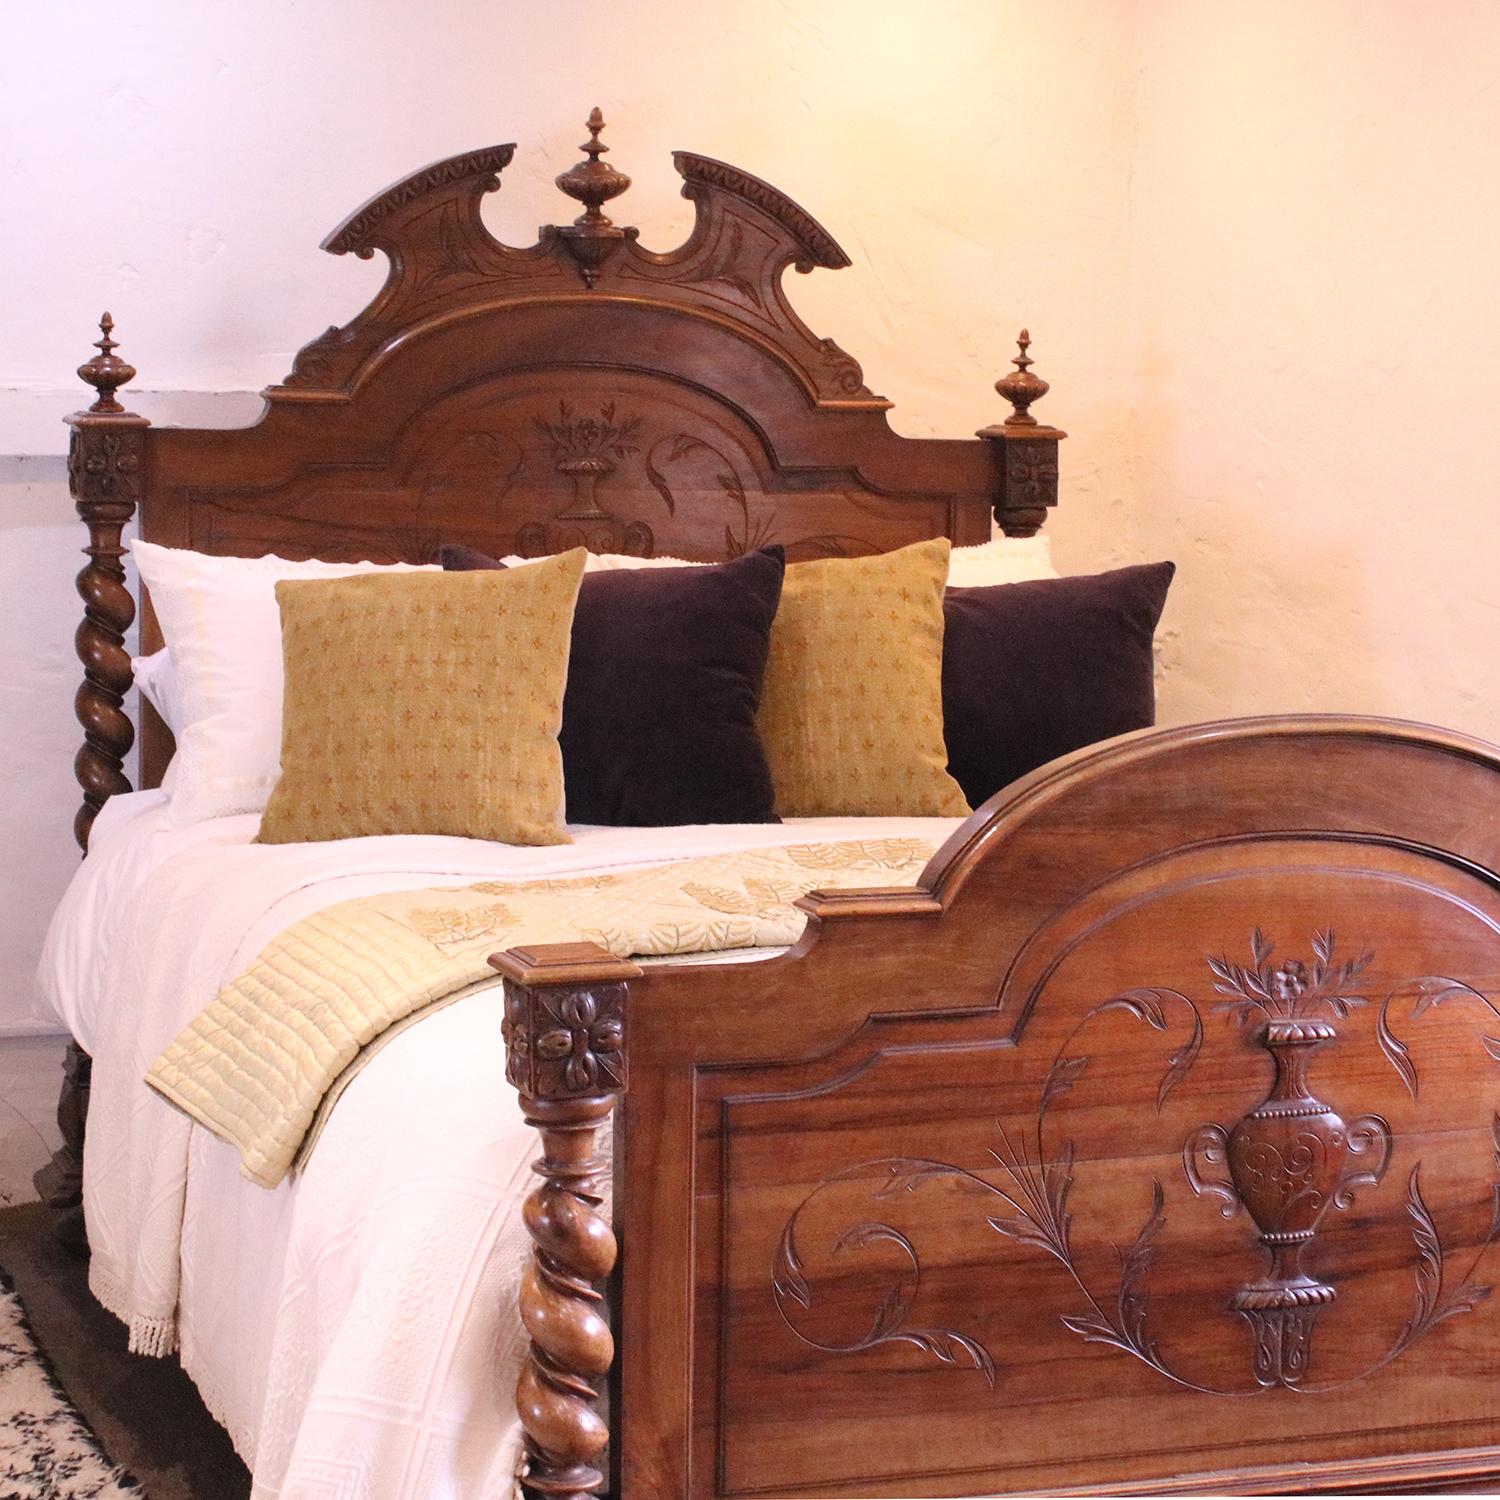 A gothic style bedstead in walnut with decoratively carved head panel, ornate pediment and finials, and turned barley twist posts.

This bed accepts a British king size or American queen size, 5ft wide (60 inches or 150cm) base and mattress